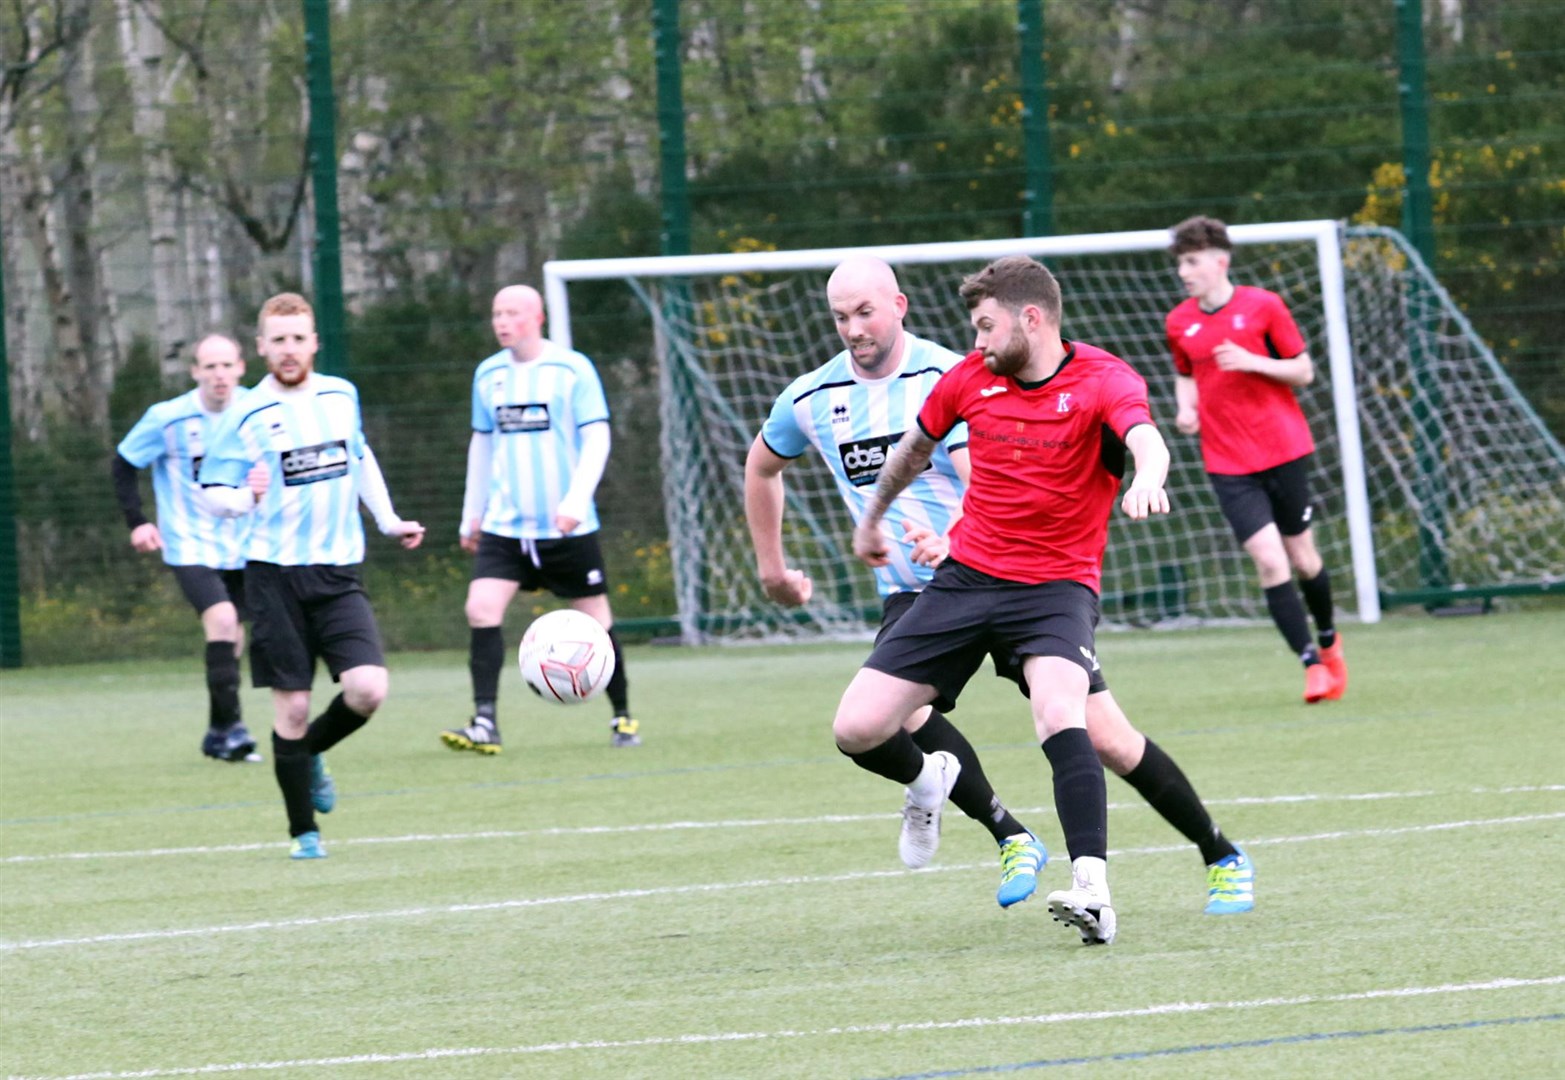 Kingussie (in red) have returned to welfare football after a seven-year break.